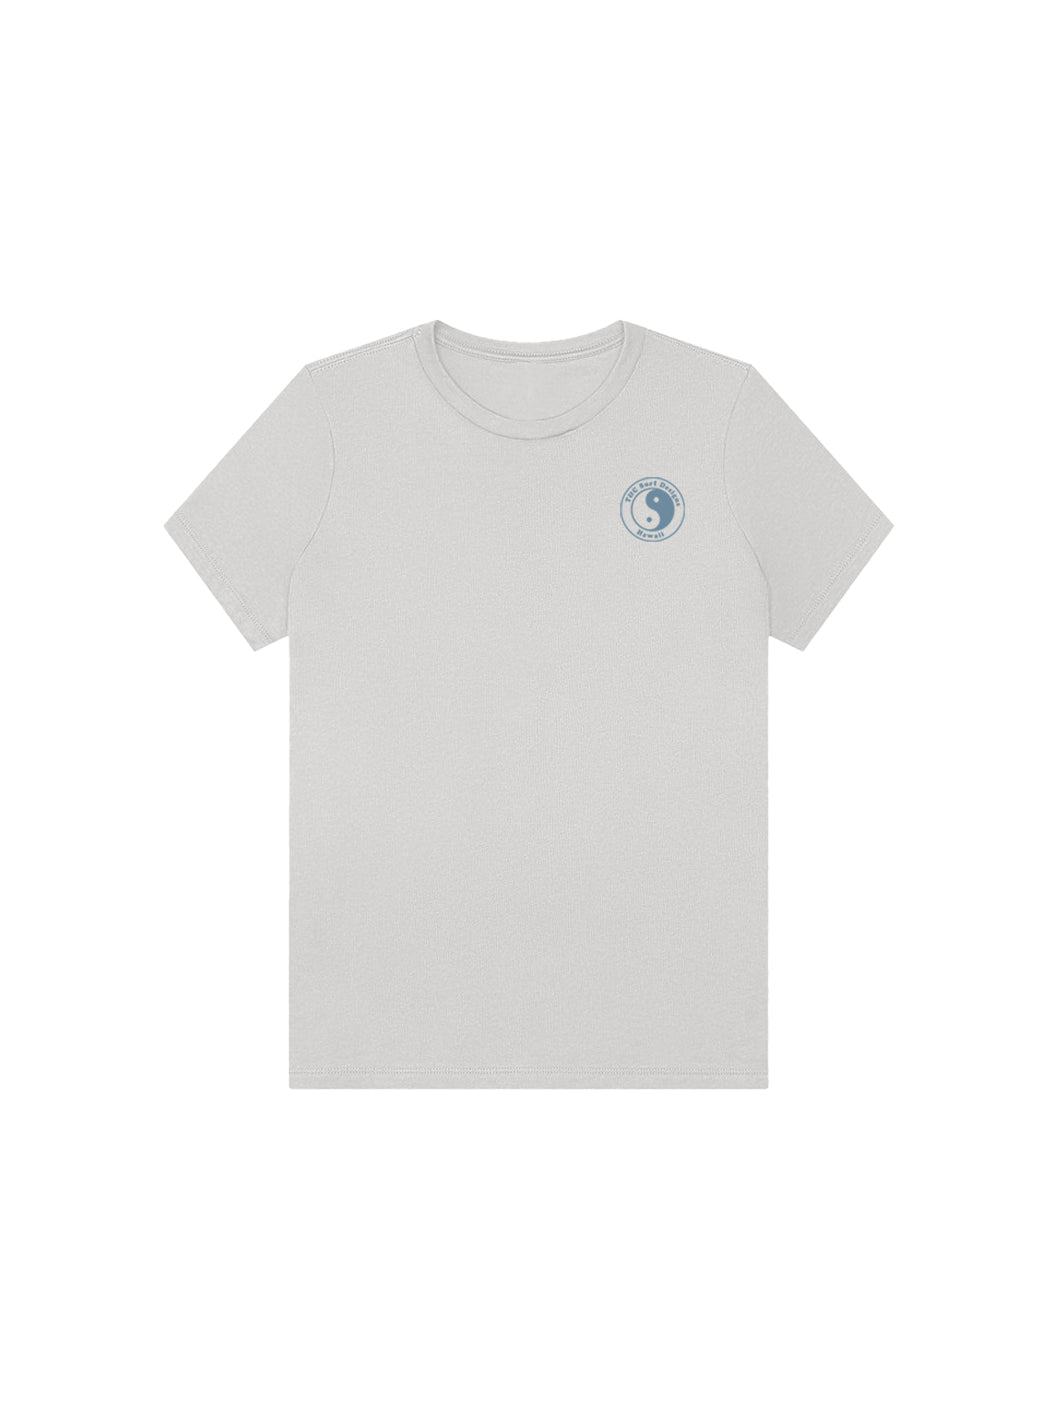 T&C Surf Designs T&C Surf Stoked Hokusai Relax Tee, 